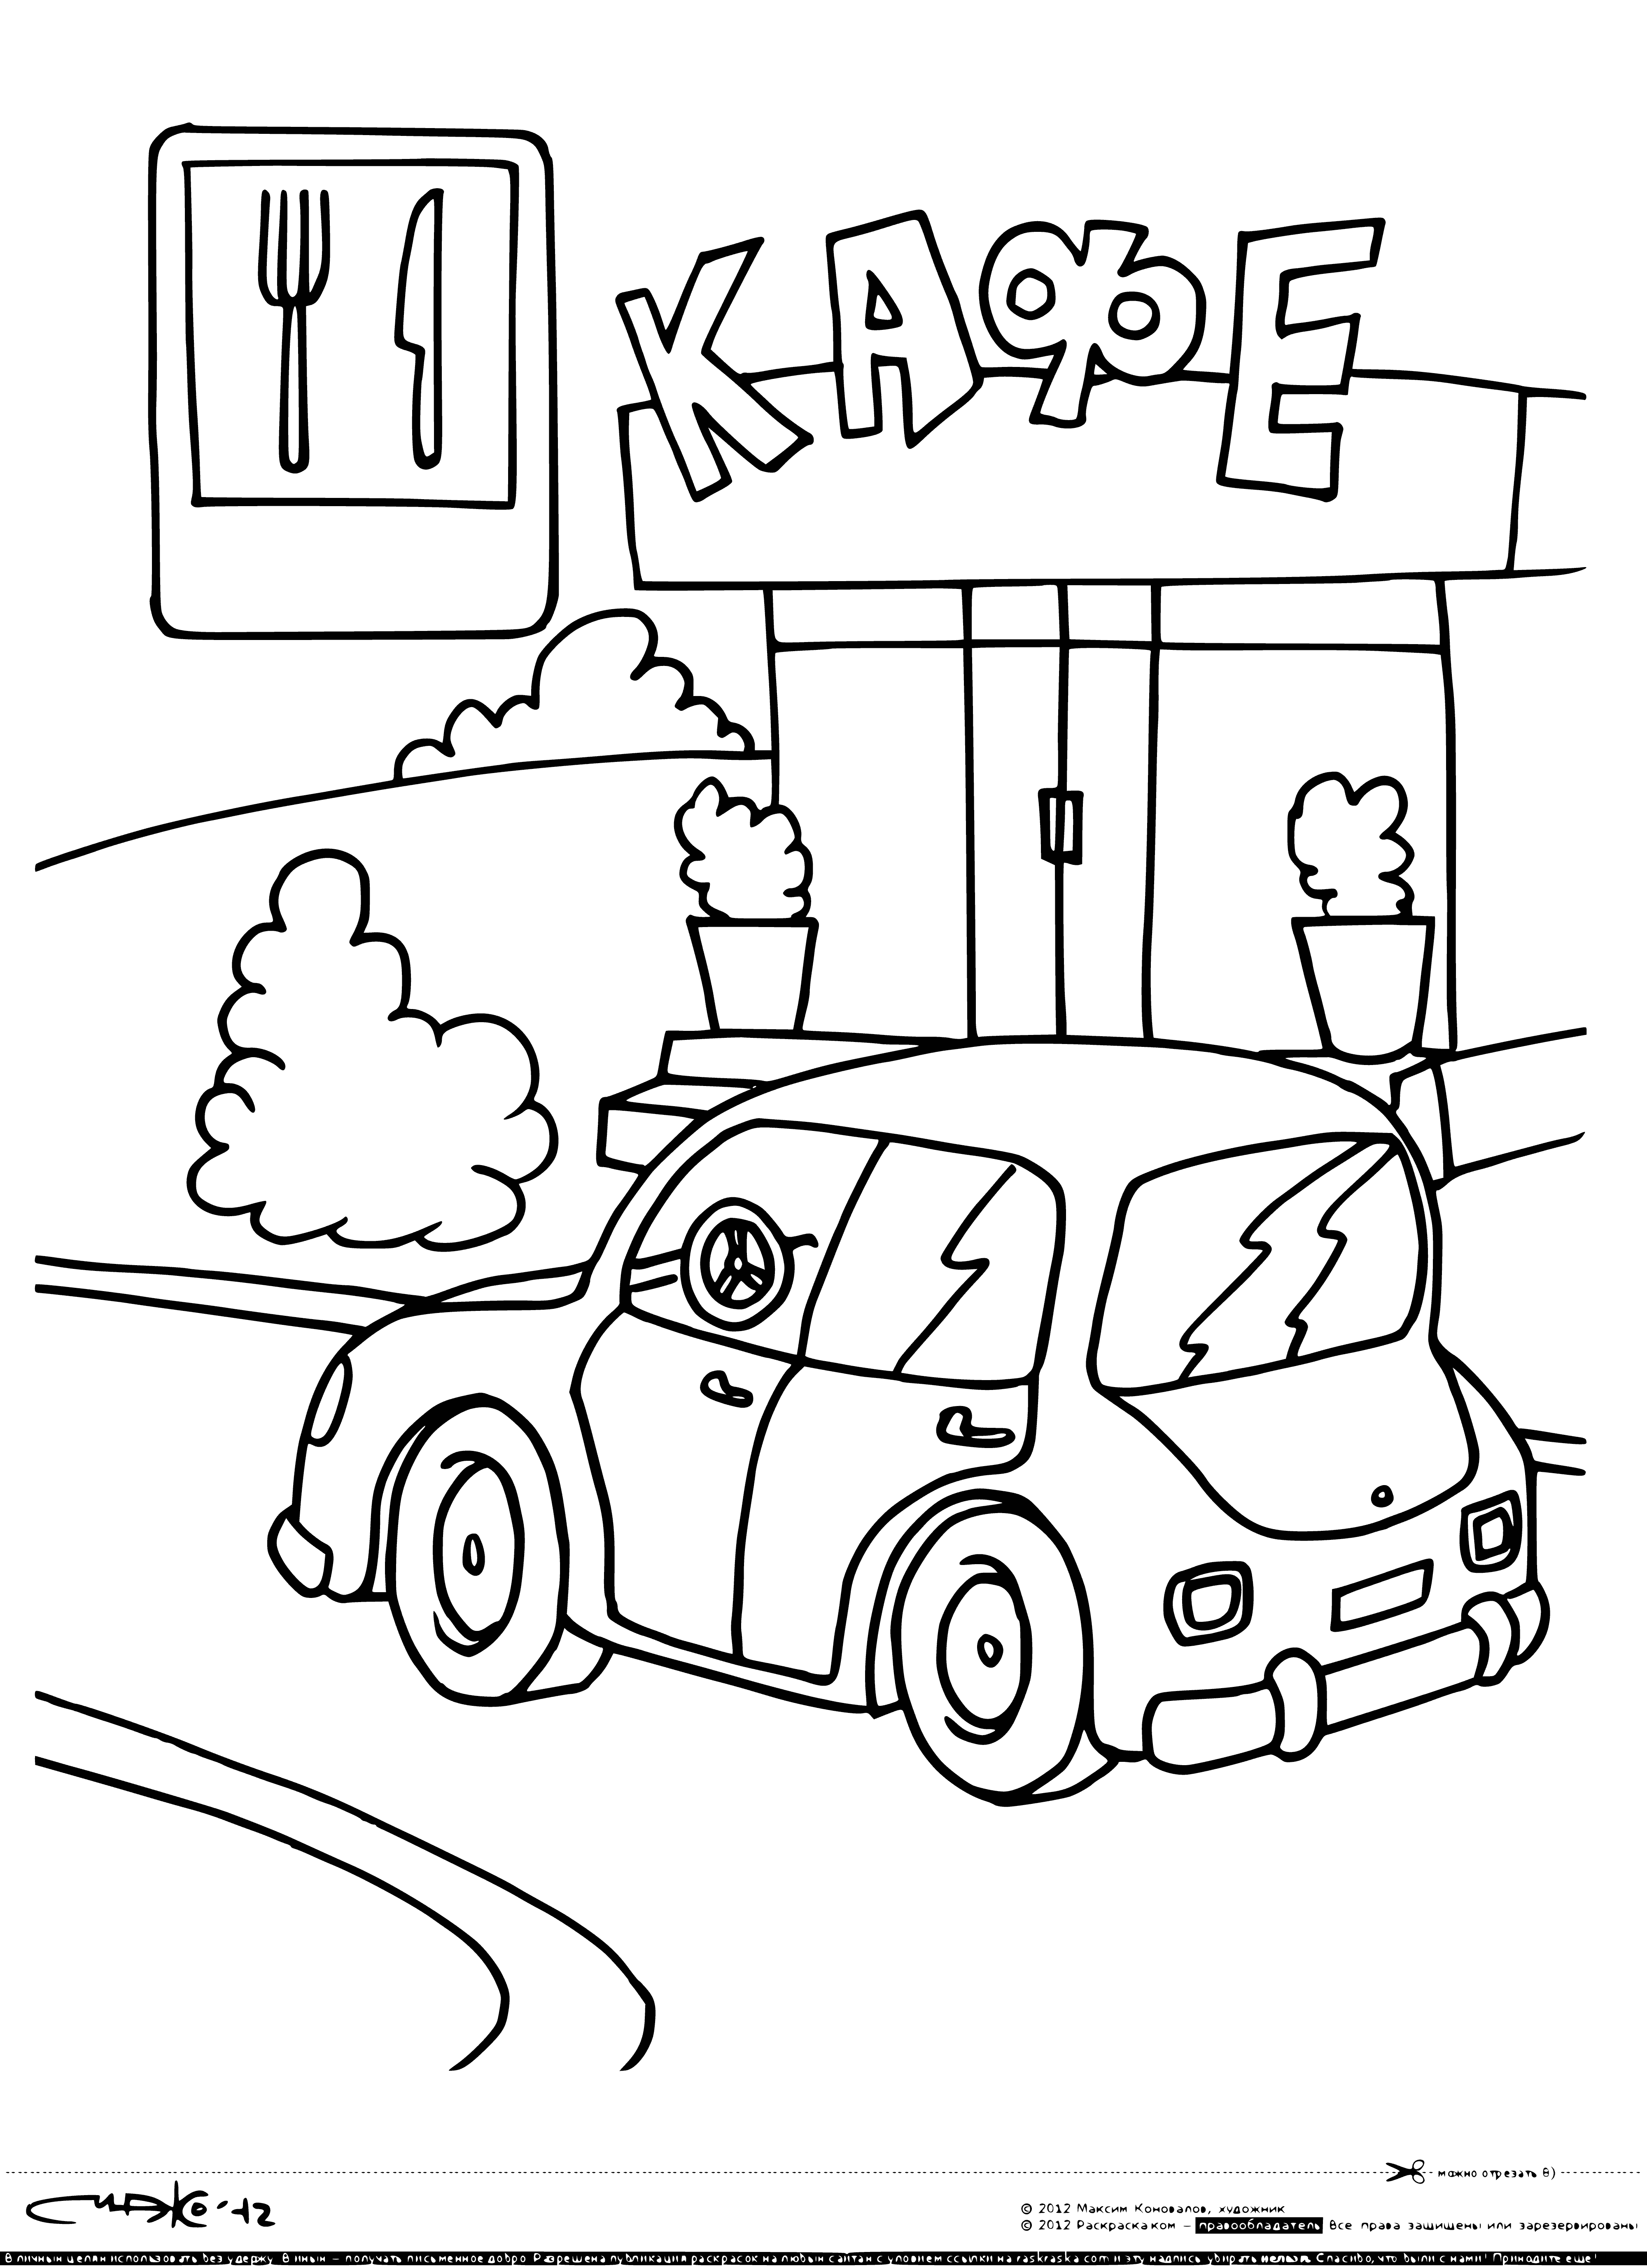 Food point coloring page